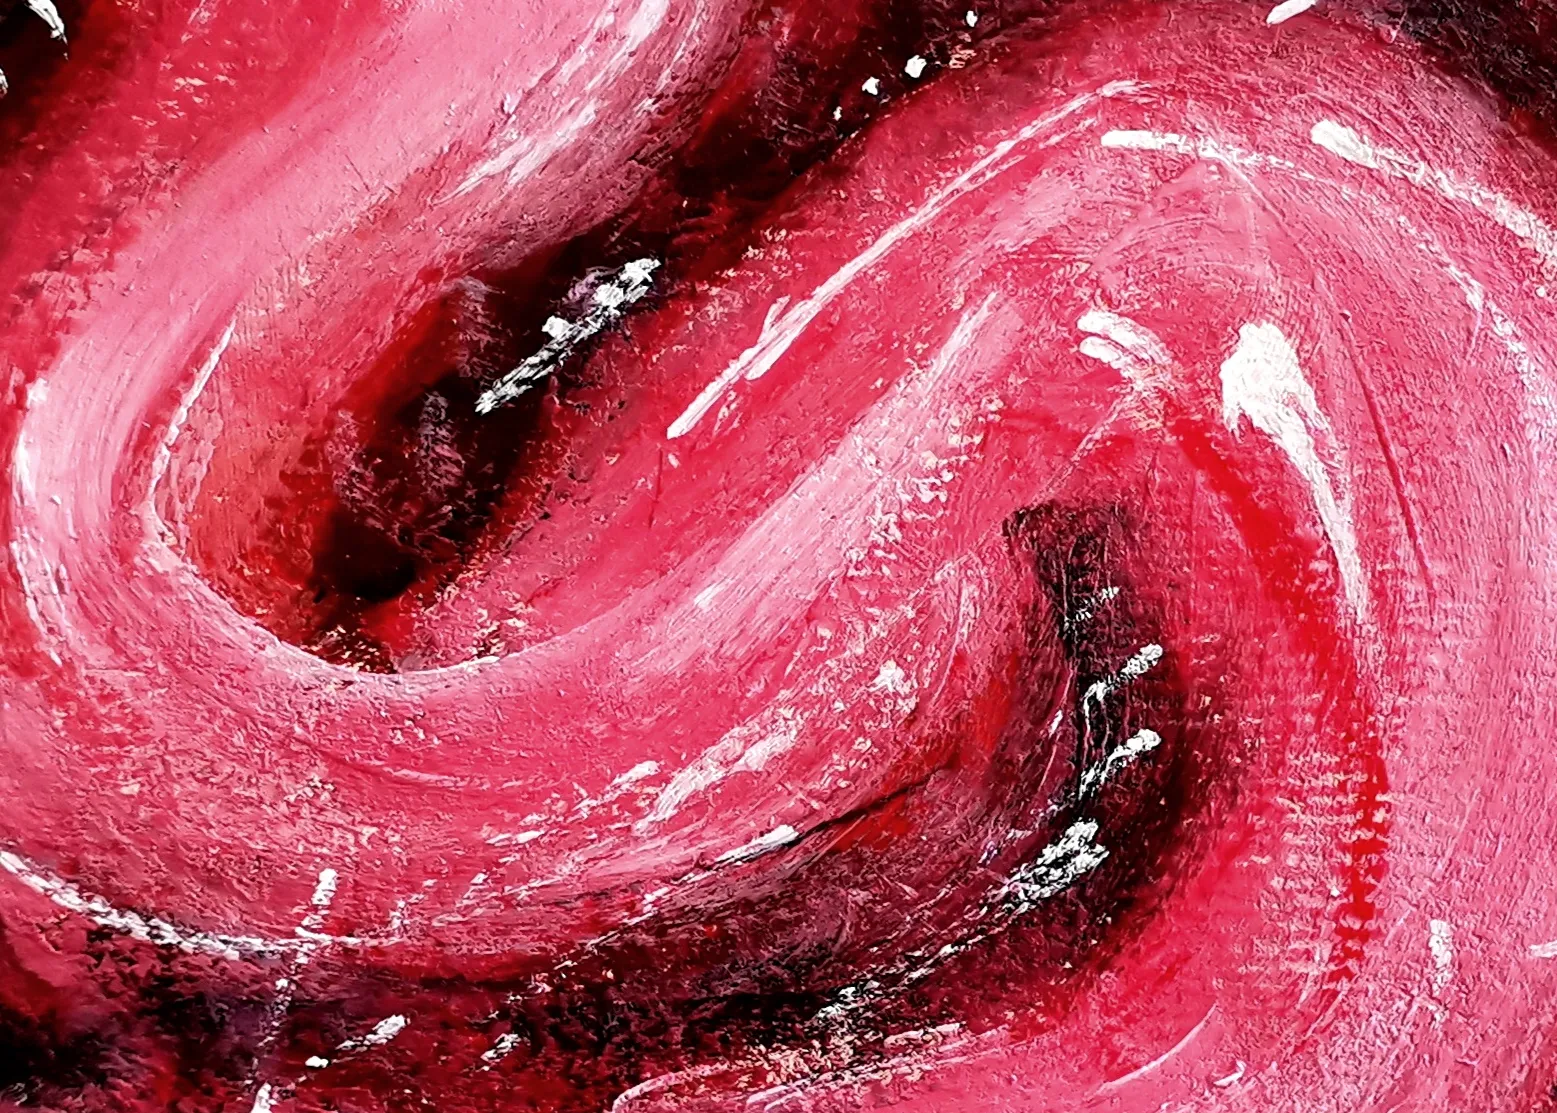 Acrylic painting of a pile of intestines.